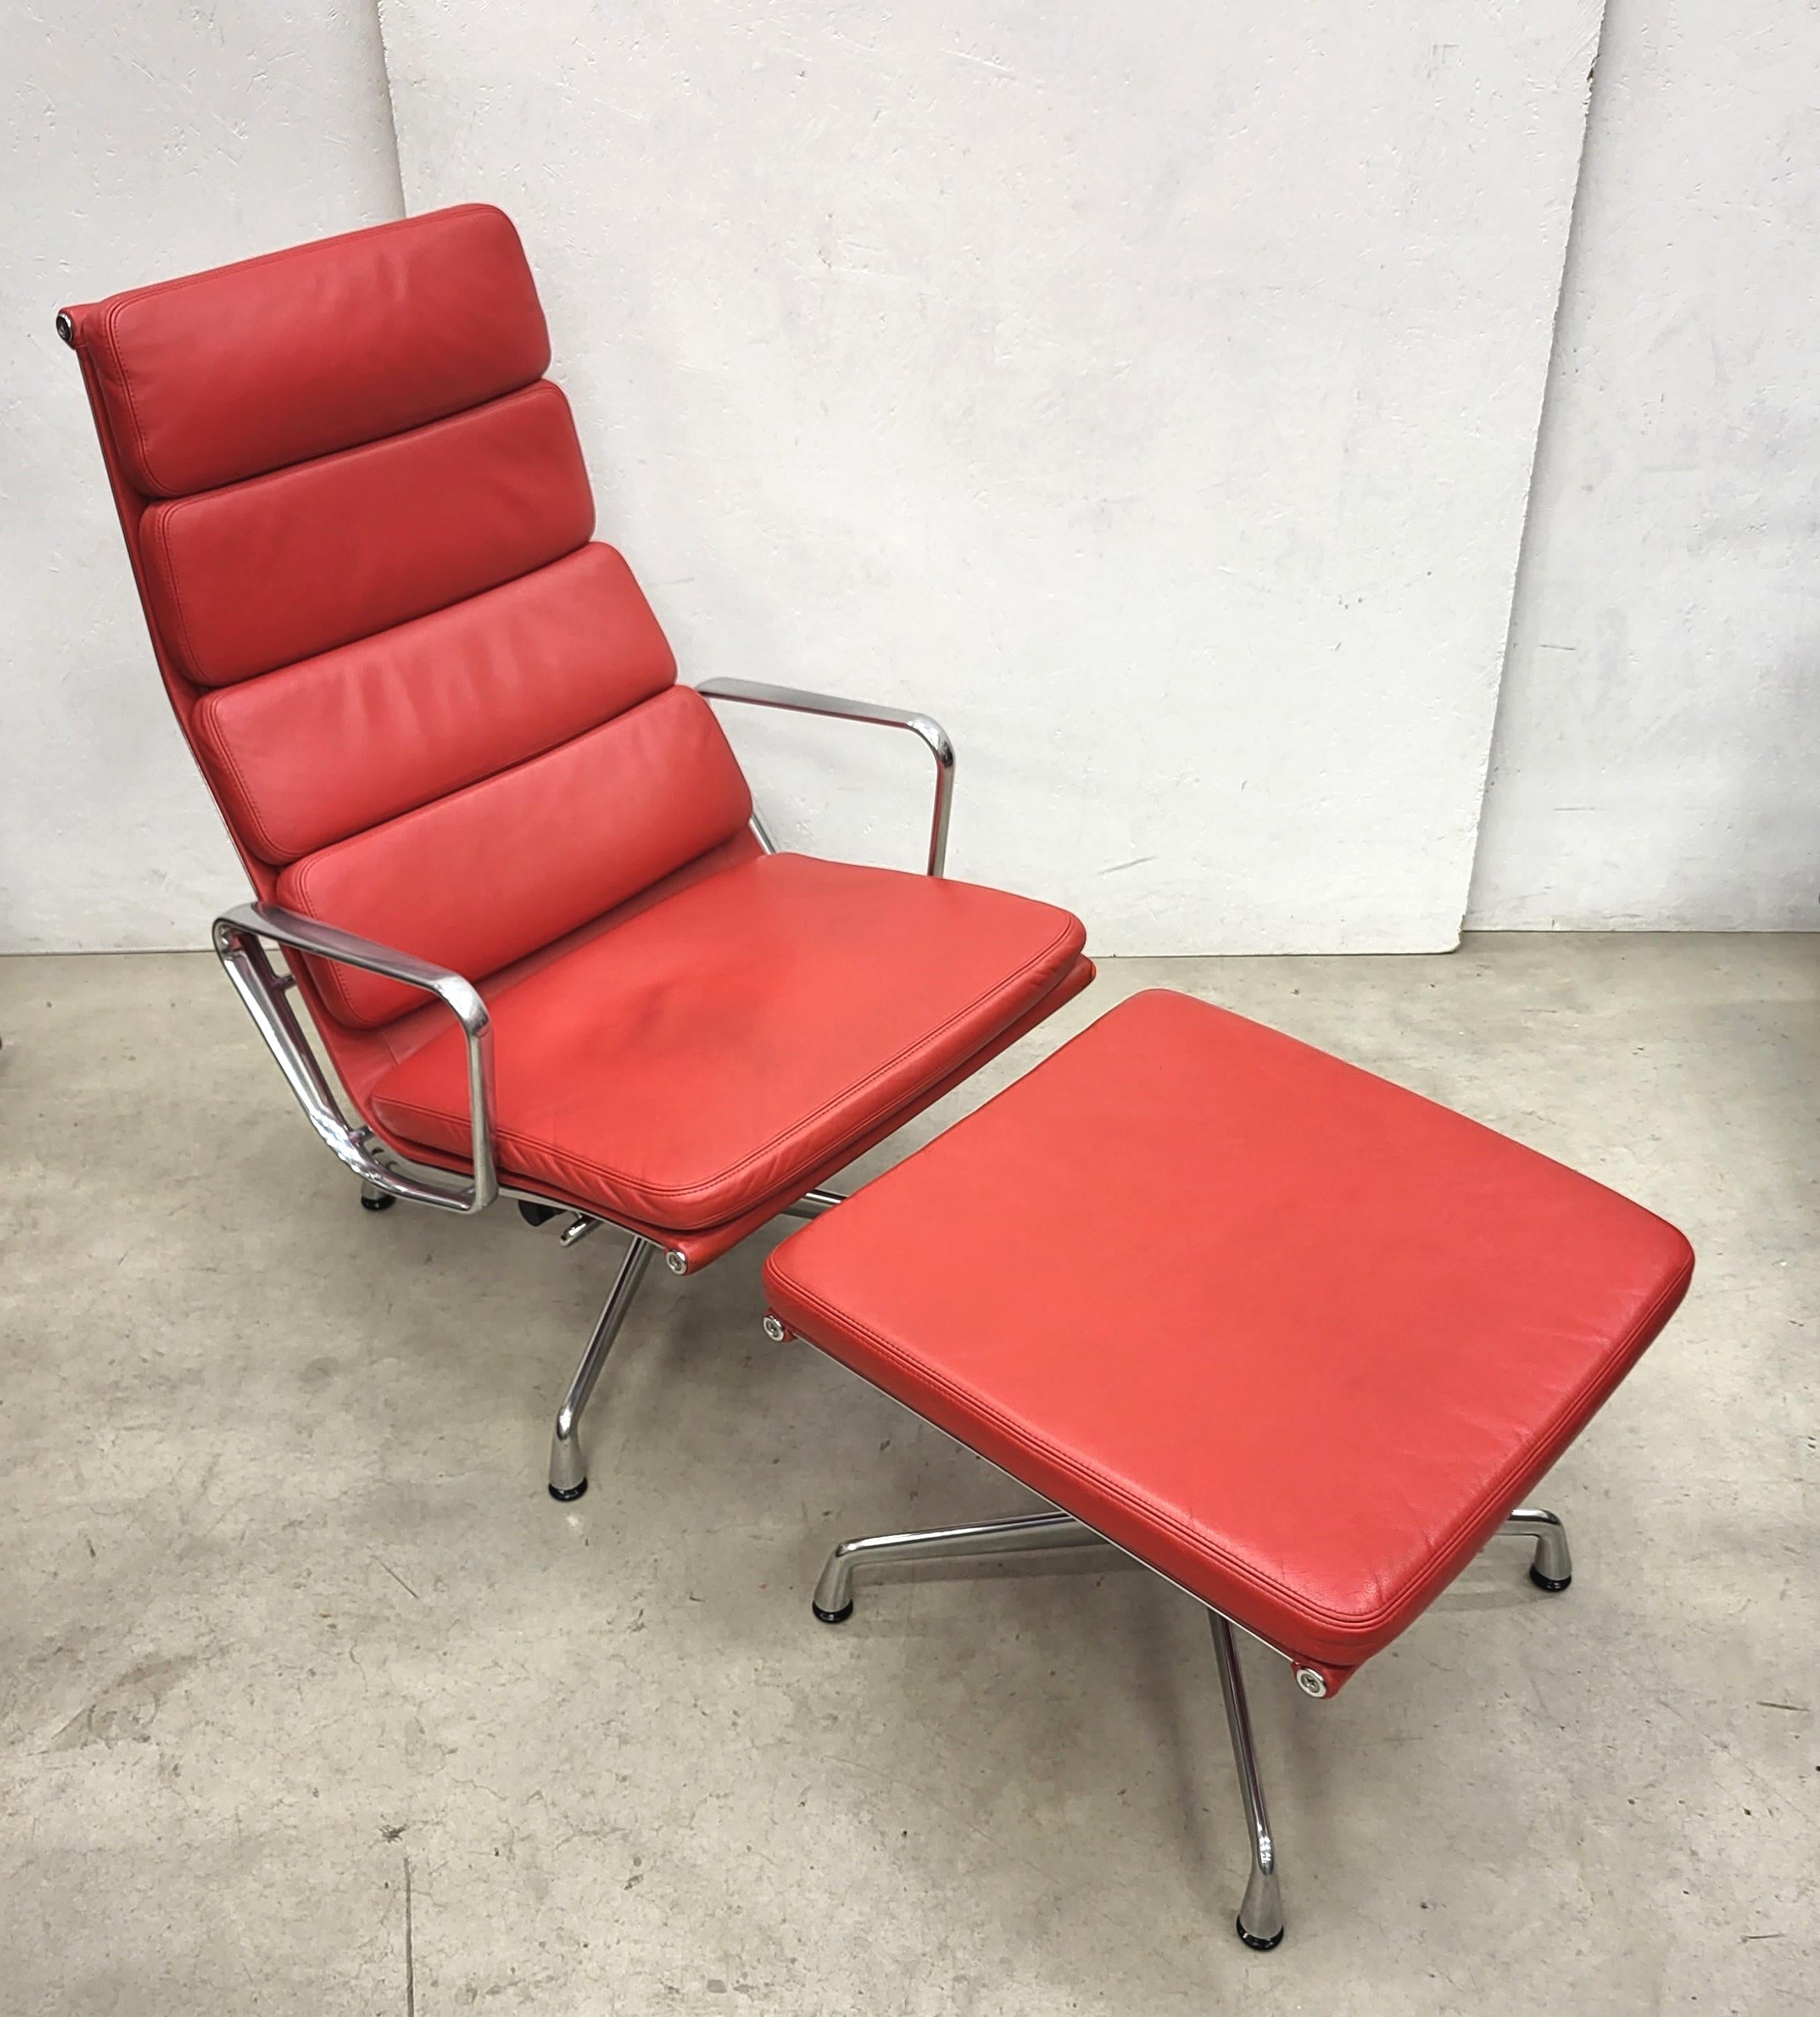 Very nice soft pad lounge chair model EA222 with ottoman produced by Vitra. 
The chair features a polished aluminium frame and was made in 2013.

The chair has a tilt mechanism which works very smoothly.

It has a wonderful red leather upholstery